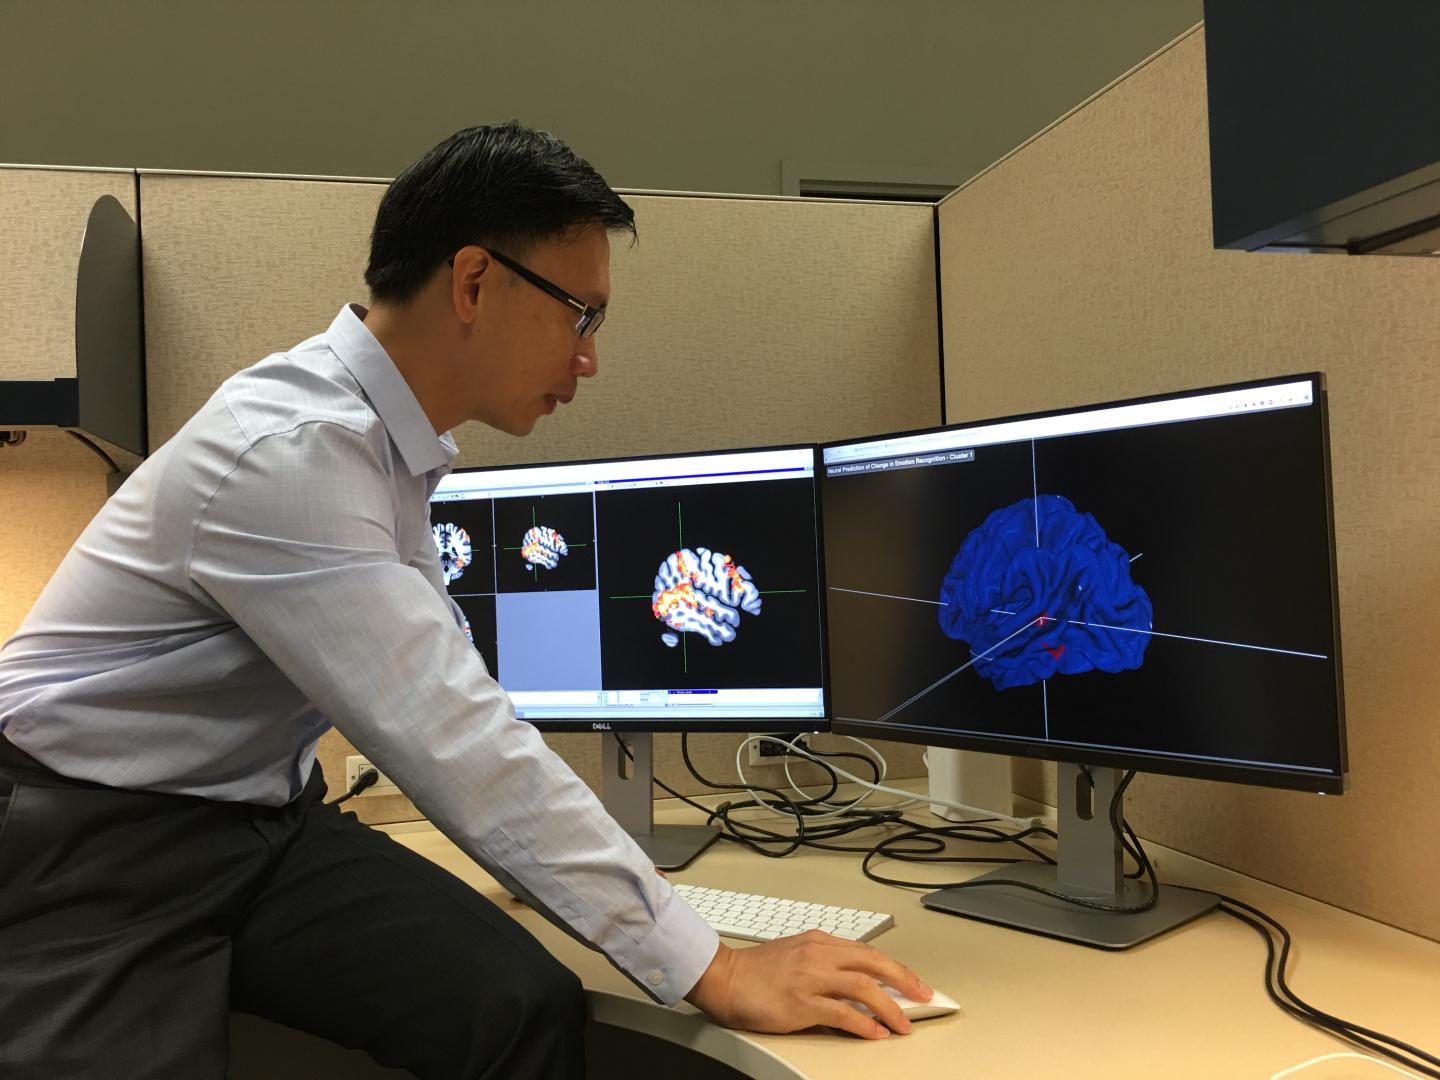 Dr. Daniel Yang Reviews Research Images from Study